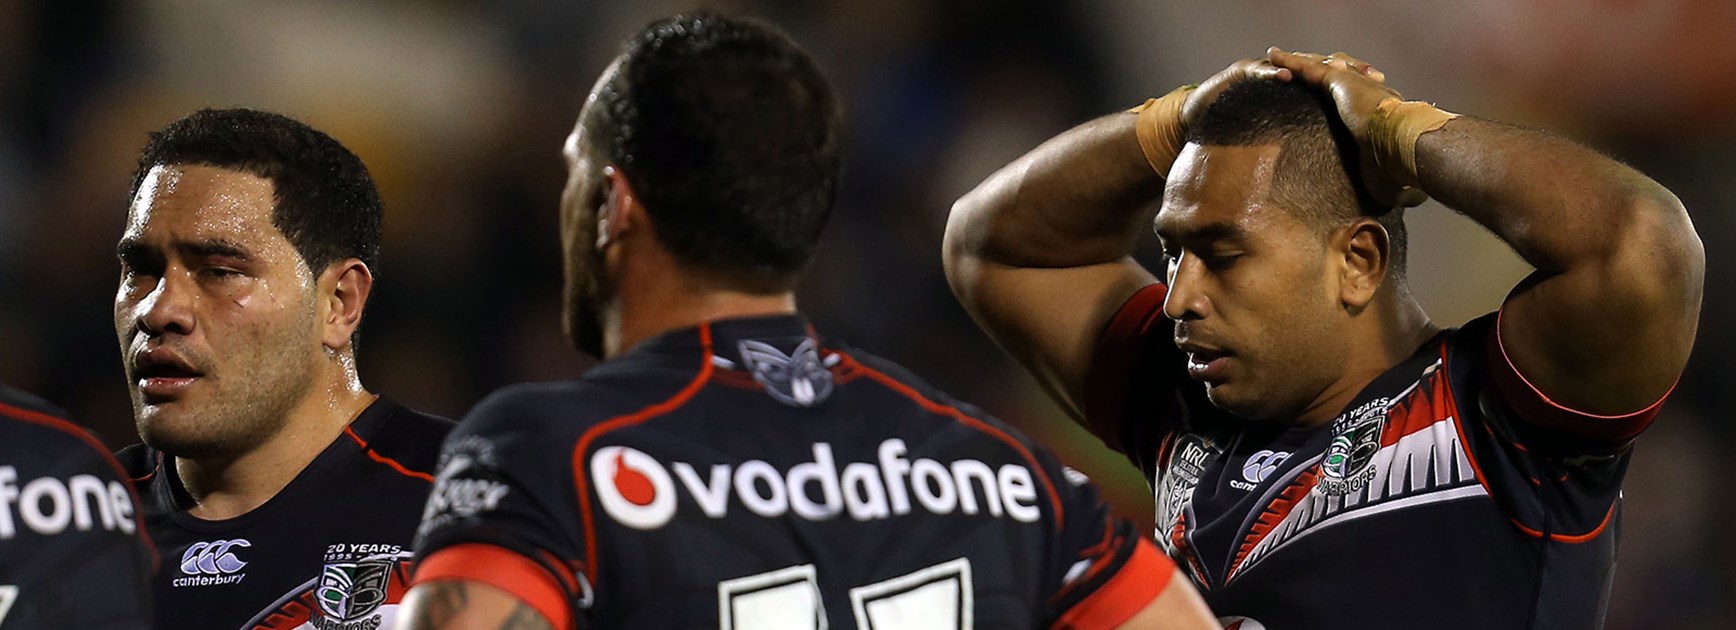 The Warriors were dejected after losing late to the Roosters in Round 14 of the Telstra Premiership.